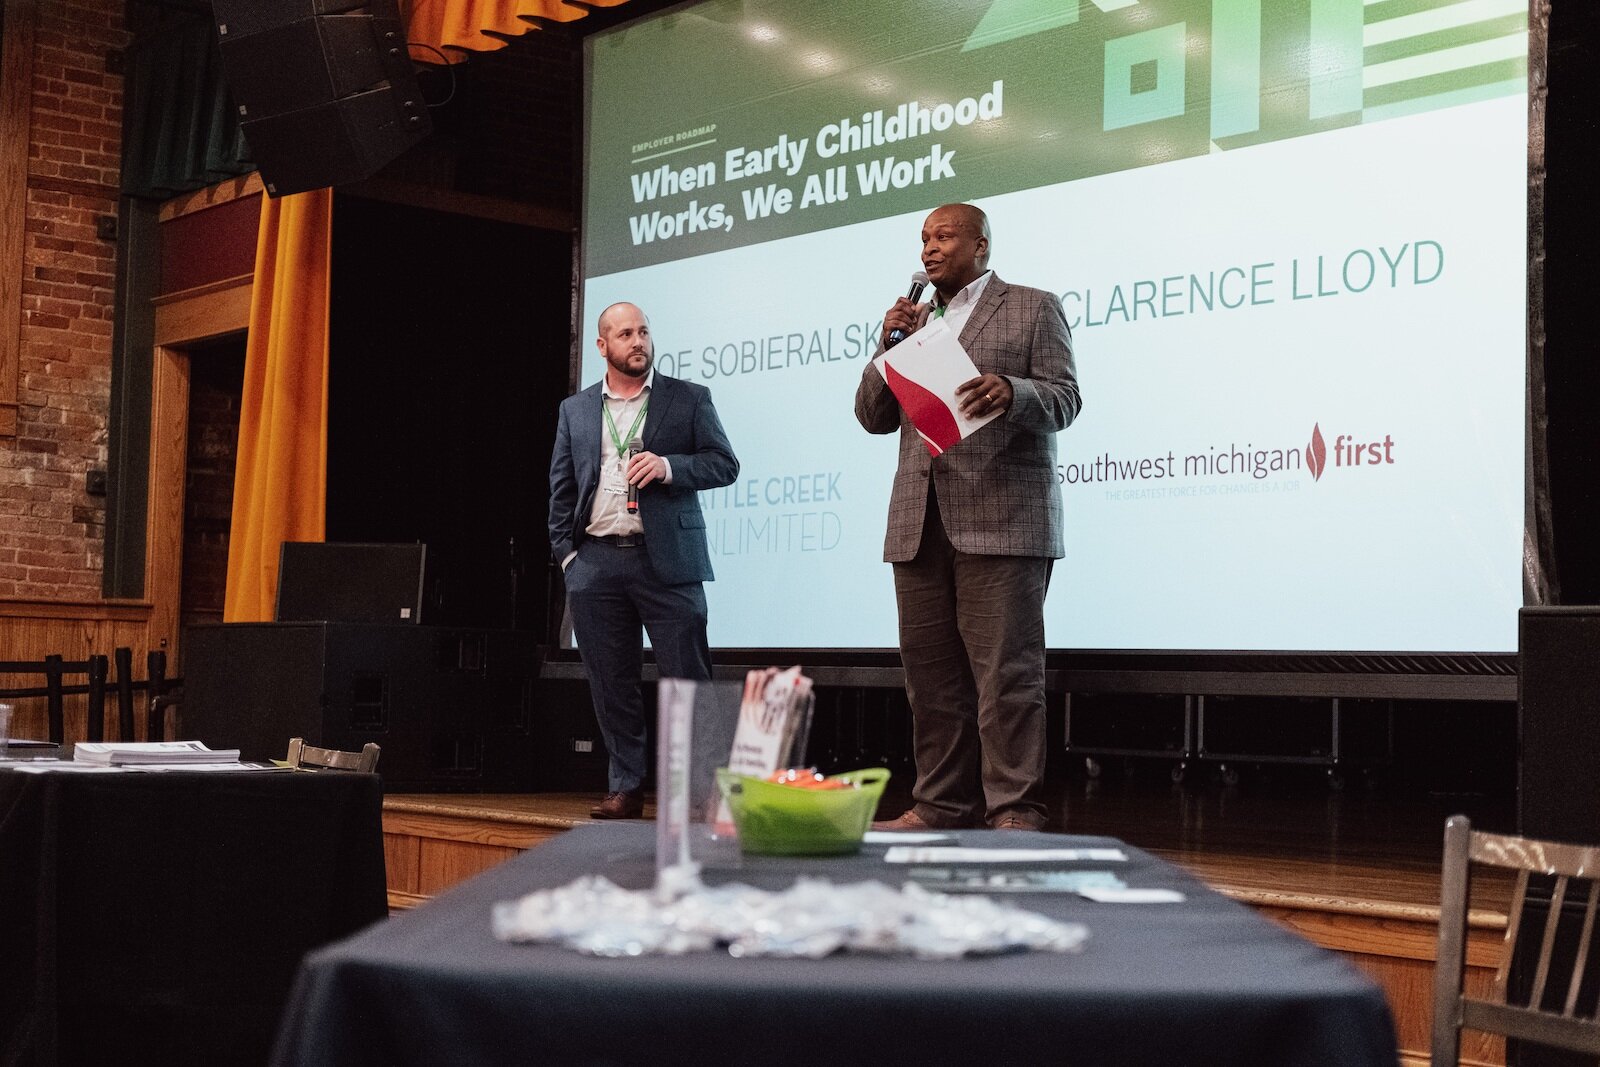 Joe Sobieralski and Clarence Lloyd speak at a recent summit for business leaders seeking options for their employees who need childcare.